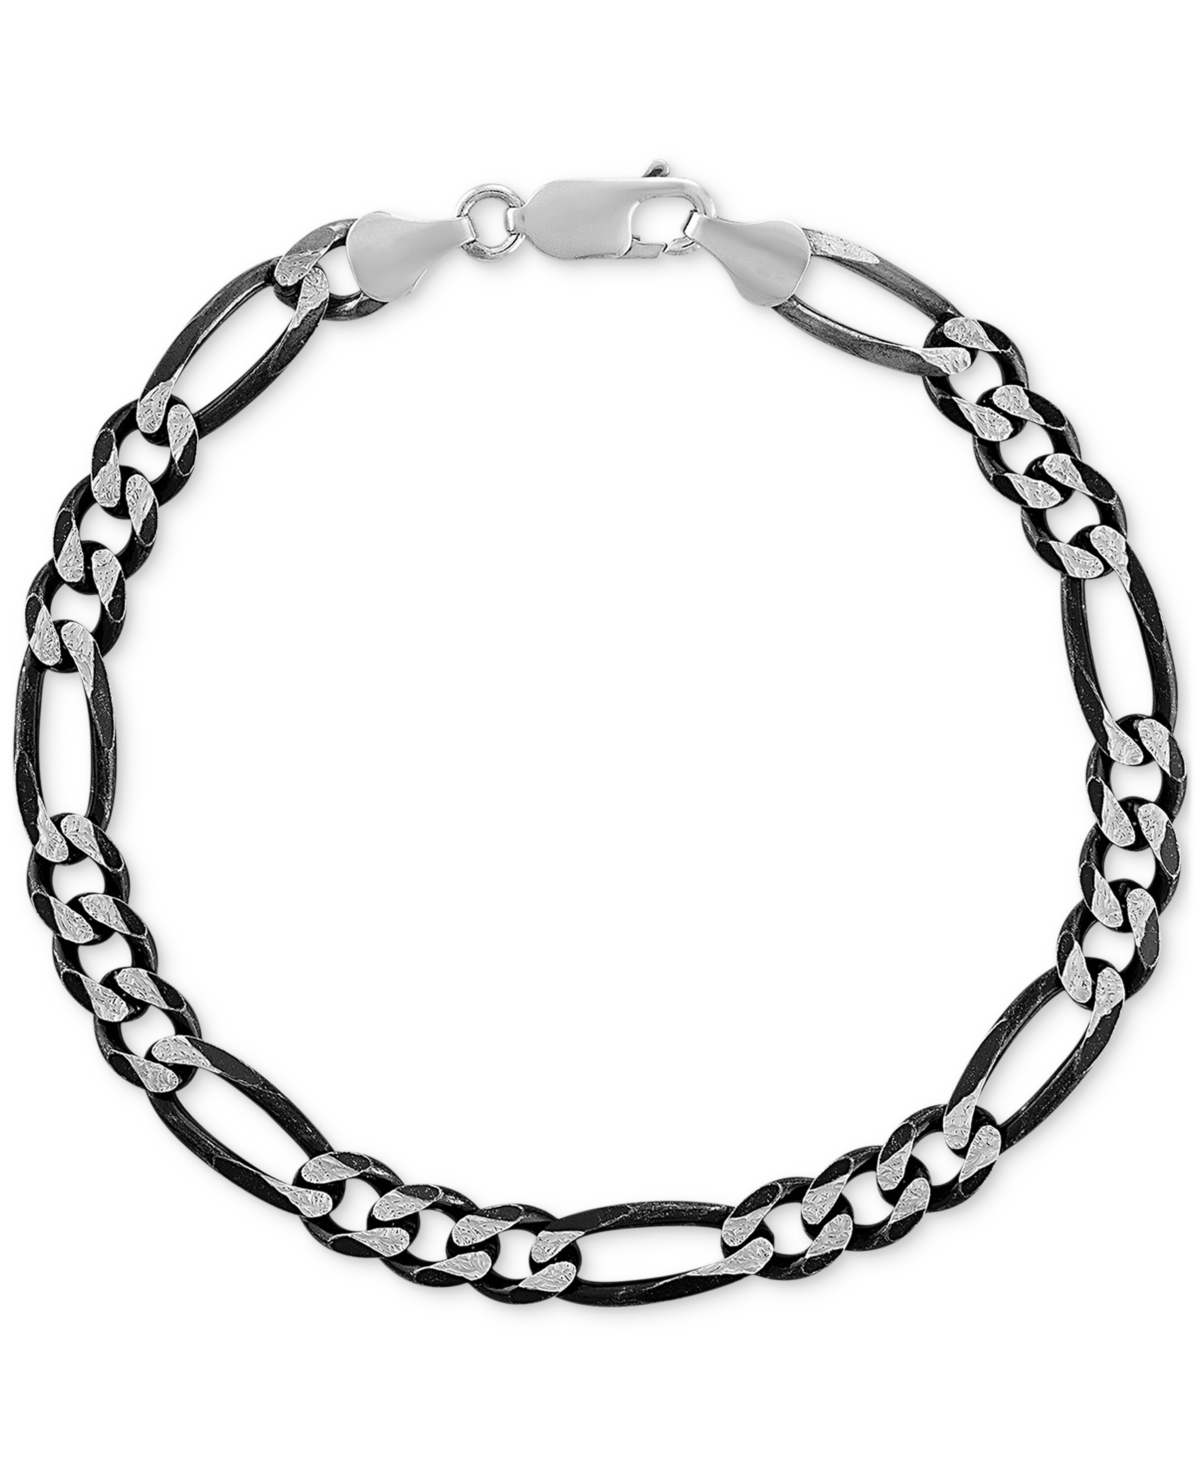 Figaro Link Chain Bracelet in Black Ruthenium-Plated Sterling Silver, Created for Macy's - Black